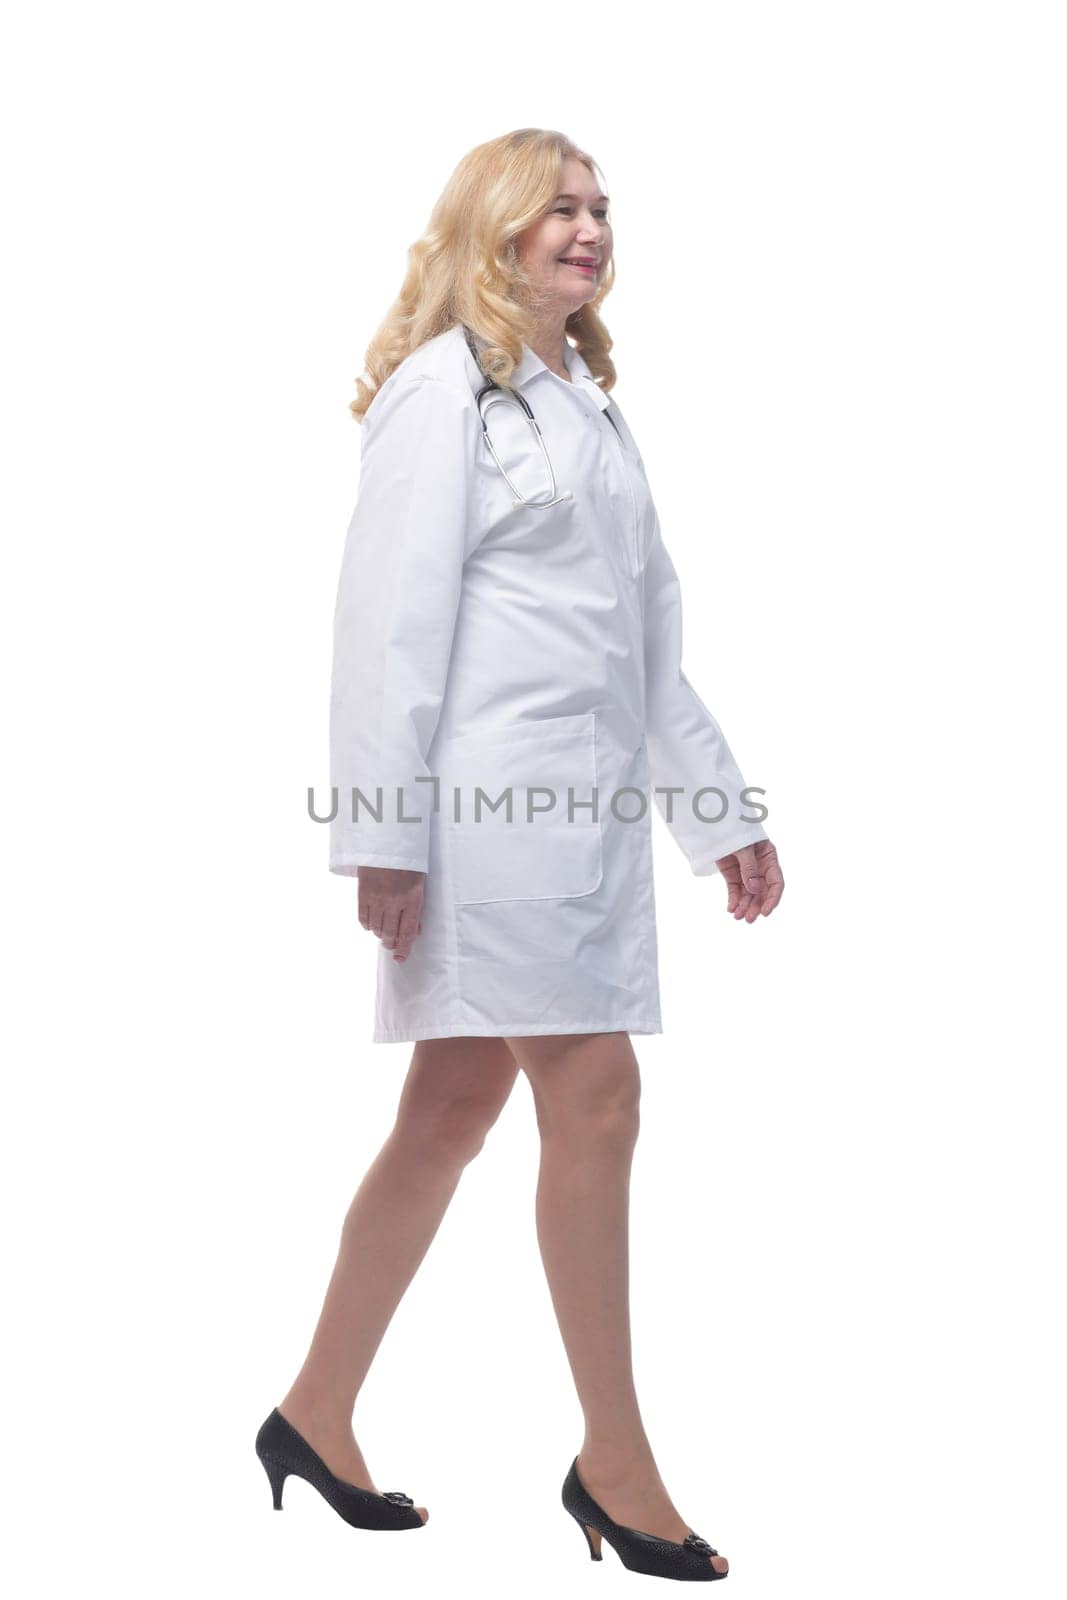 full length . successful woman doctor stepping forward . isolated on white background.